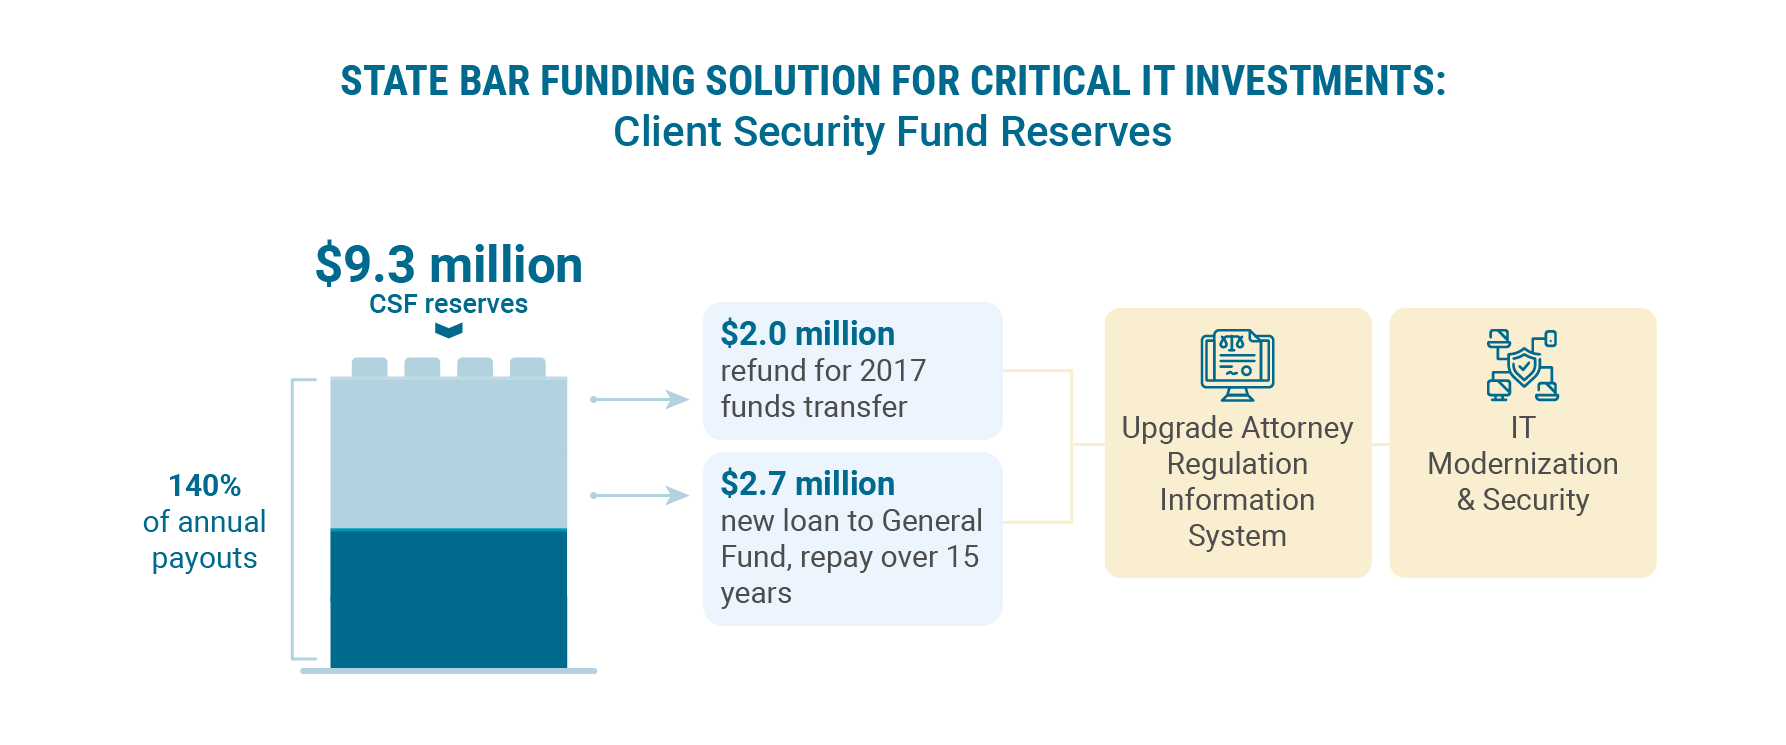 Infographic showing proposal to transfer $4.7 million from $9.3 million in Client Security Fund reserves for critical IT investments